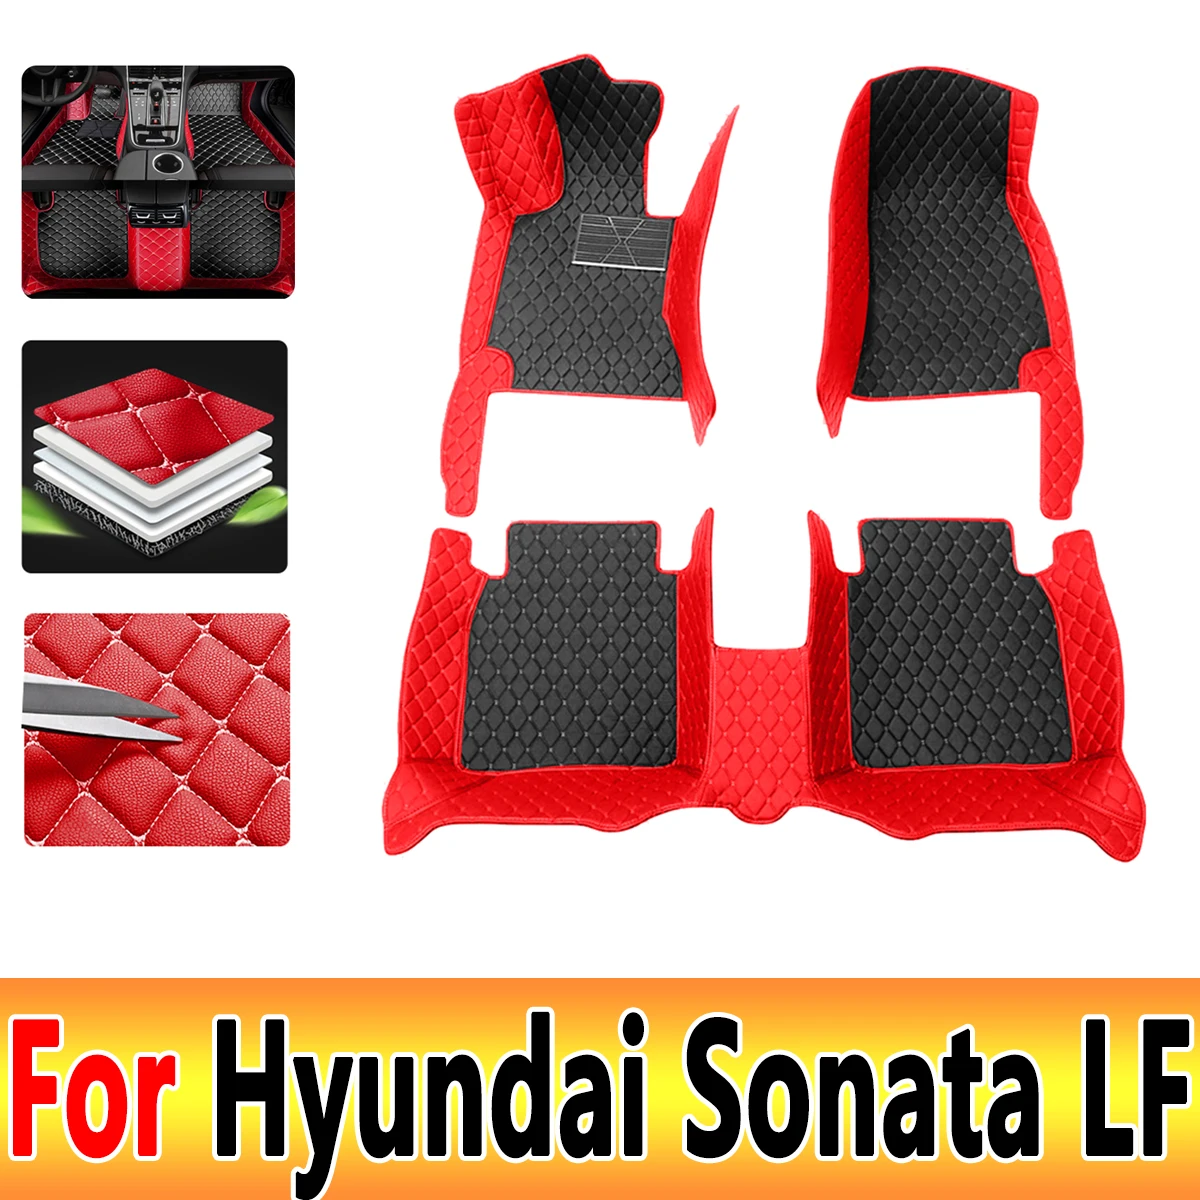 

For Hyundai Sonata LF 2018 2017 2016 2015 Car Floor Mats Interior Leather Carpets Auto Accessories Styling Custom Rugs Protect